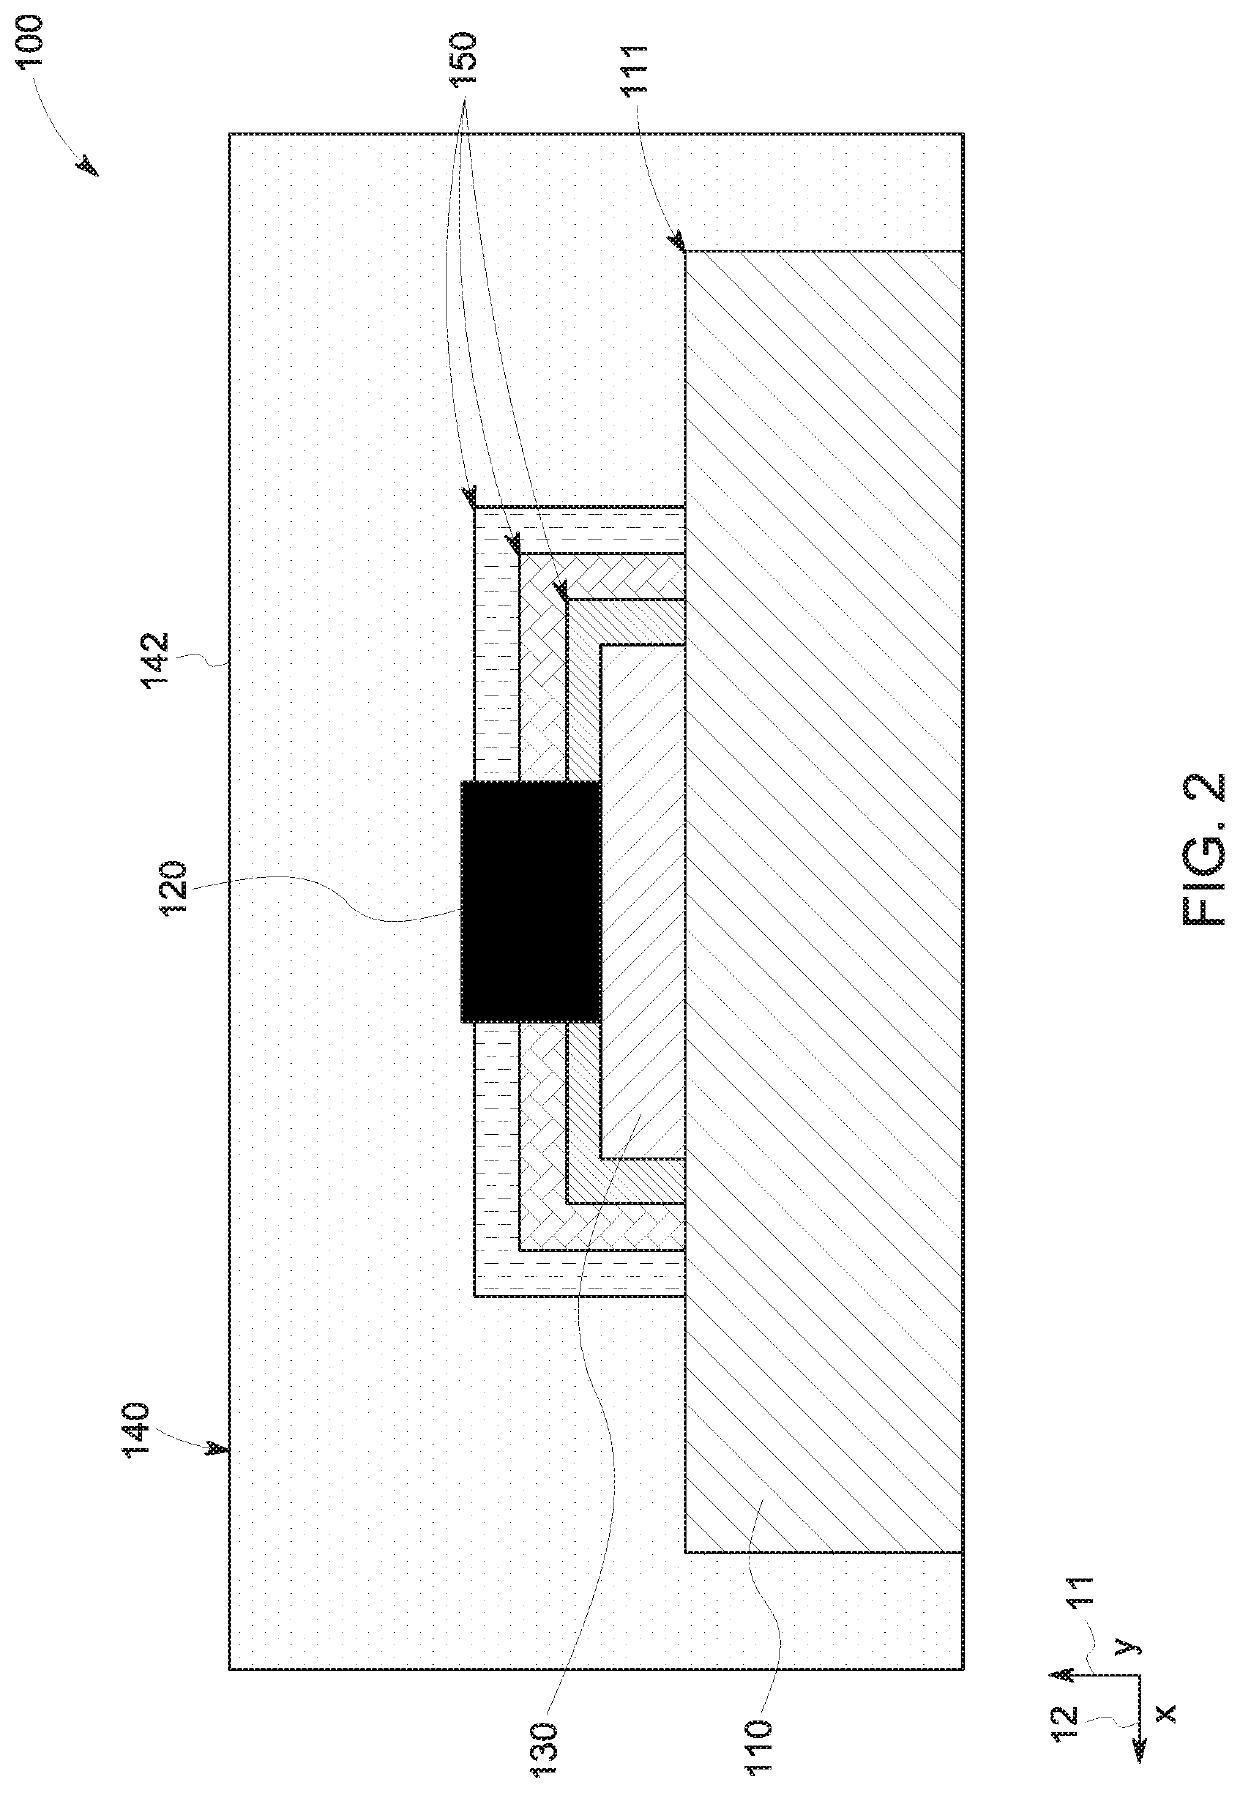 Insulation systems and methods of depositing insulation systems